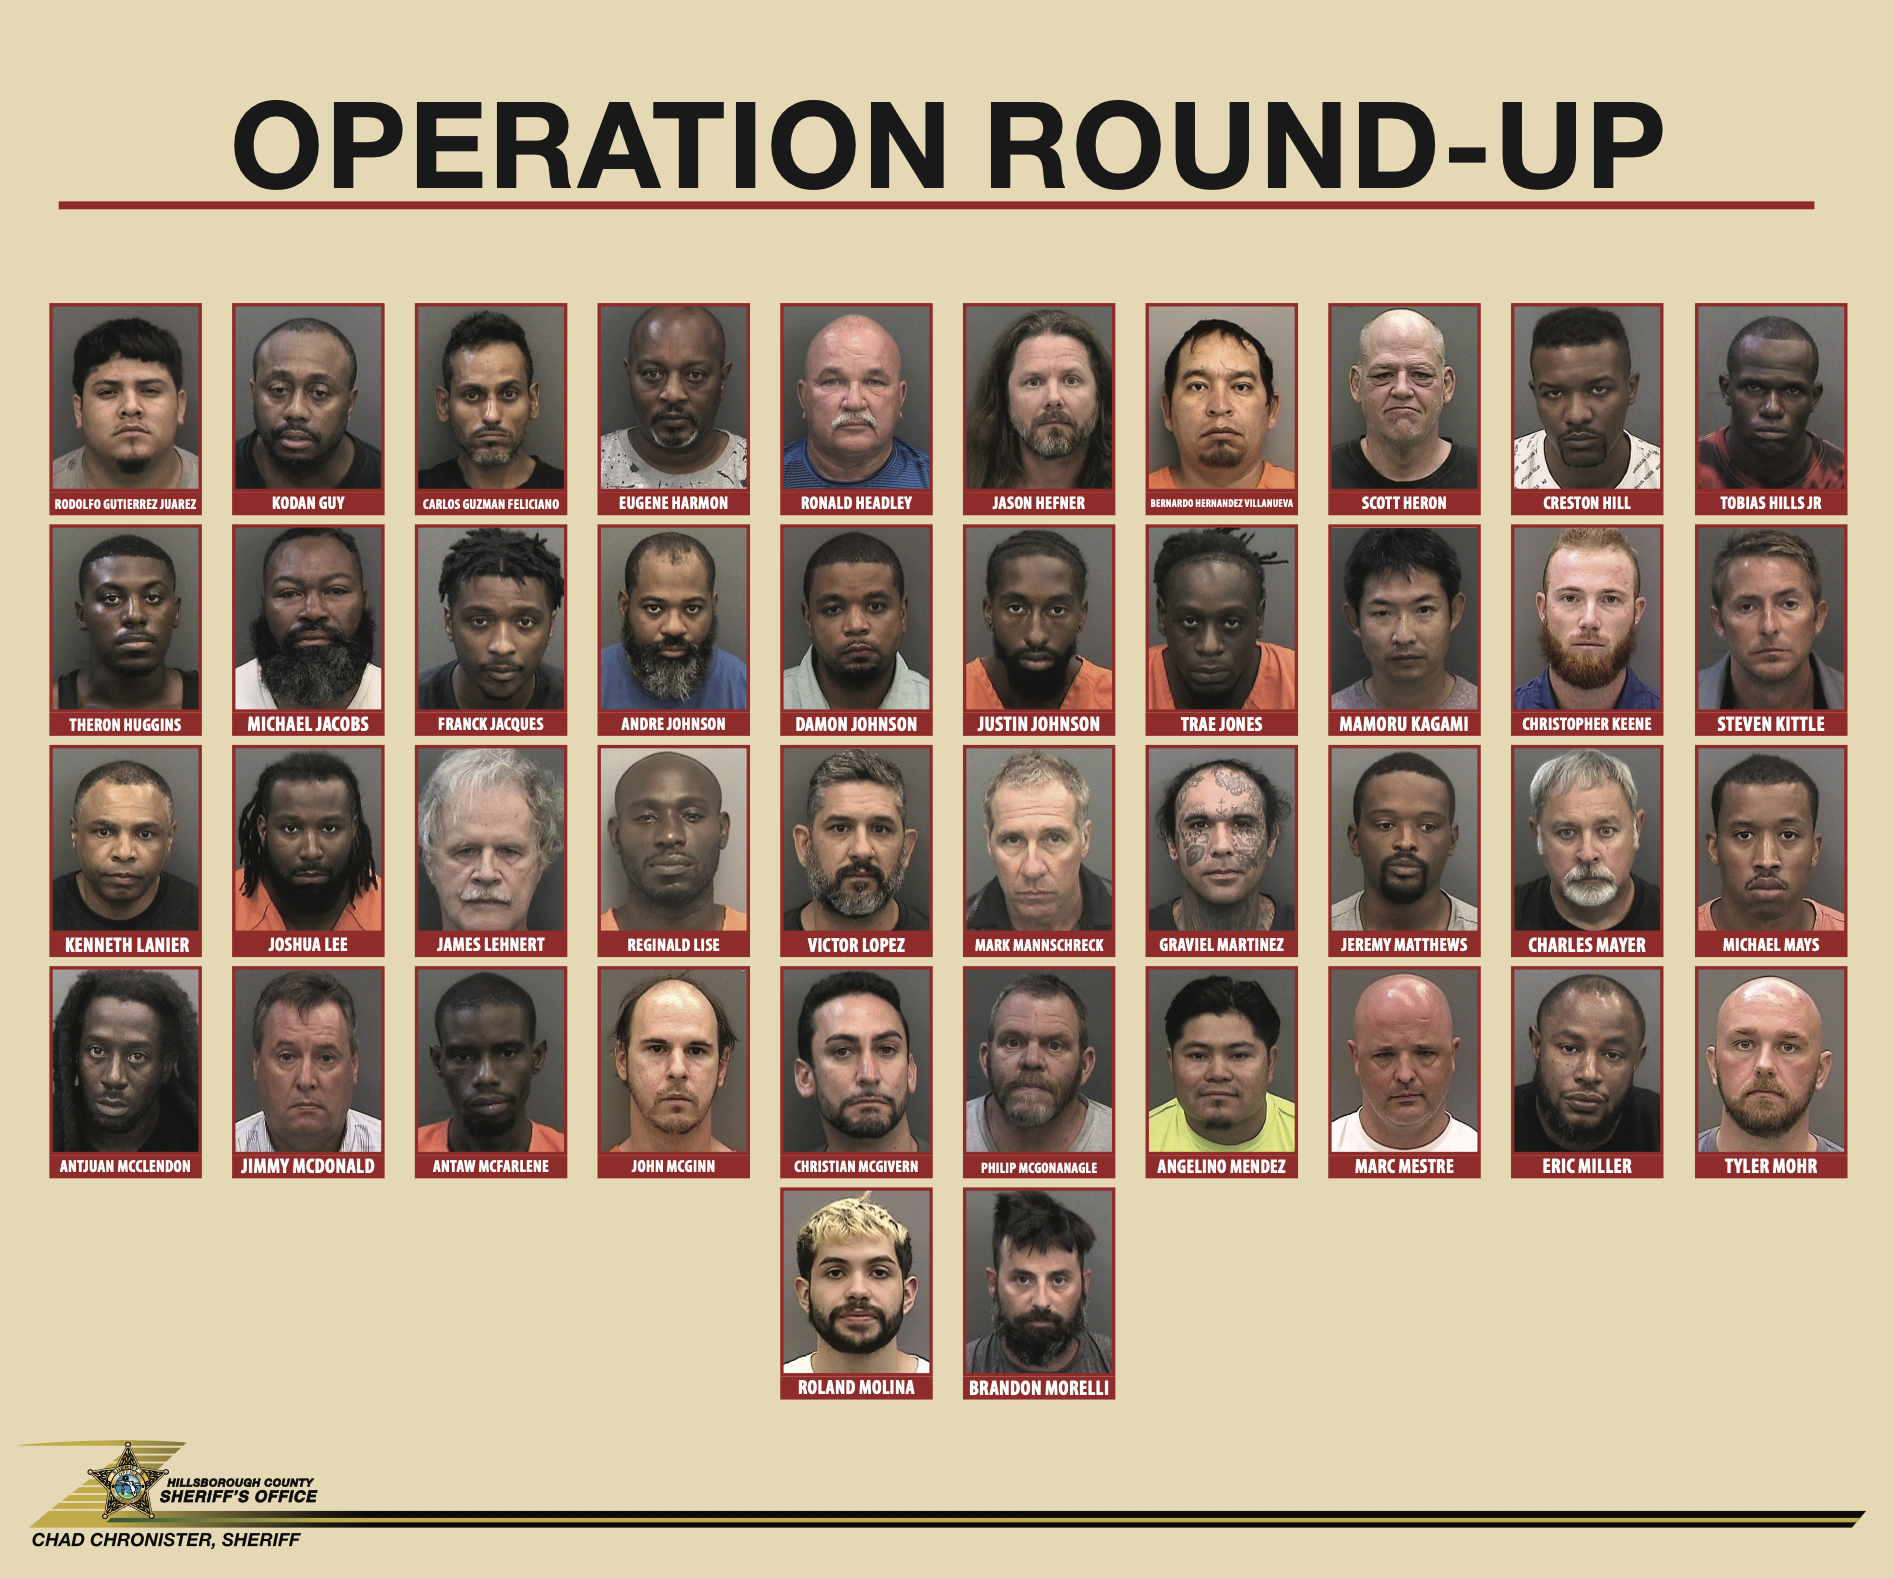 HCSO Arrests 125 During "Operation Round-Up" Supporting Image